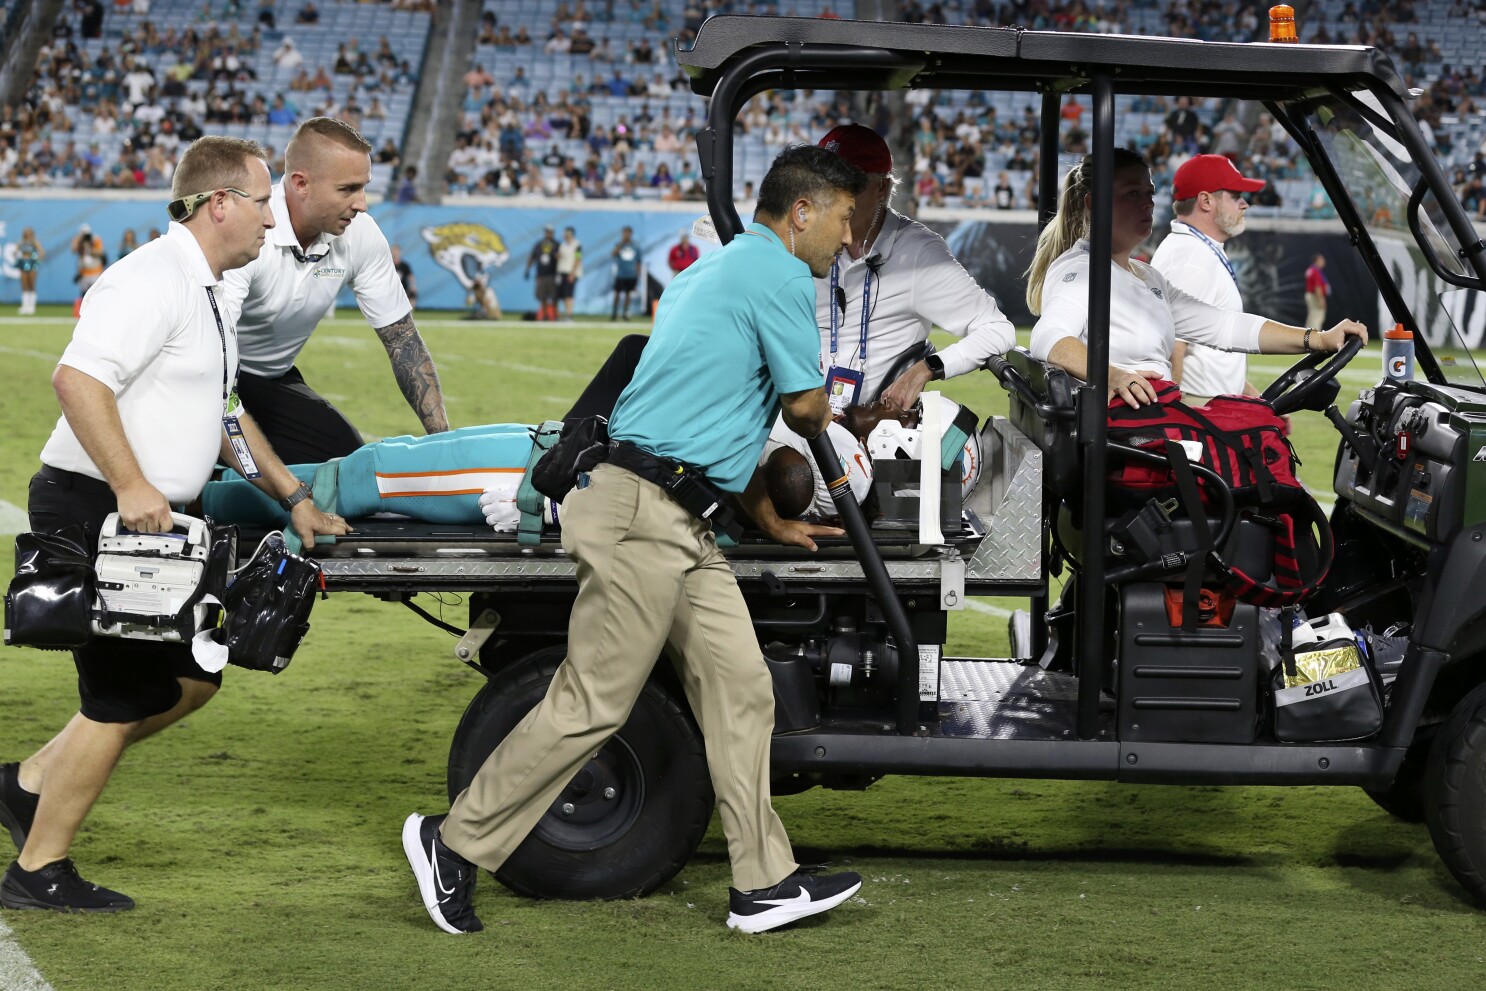 Daewood Davis of Dolphins carted off field after collision; preseason